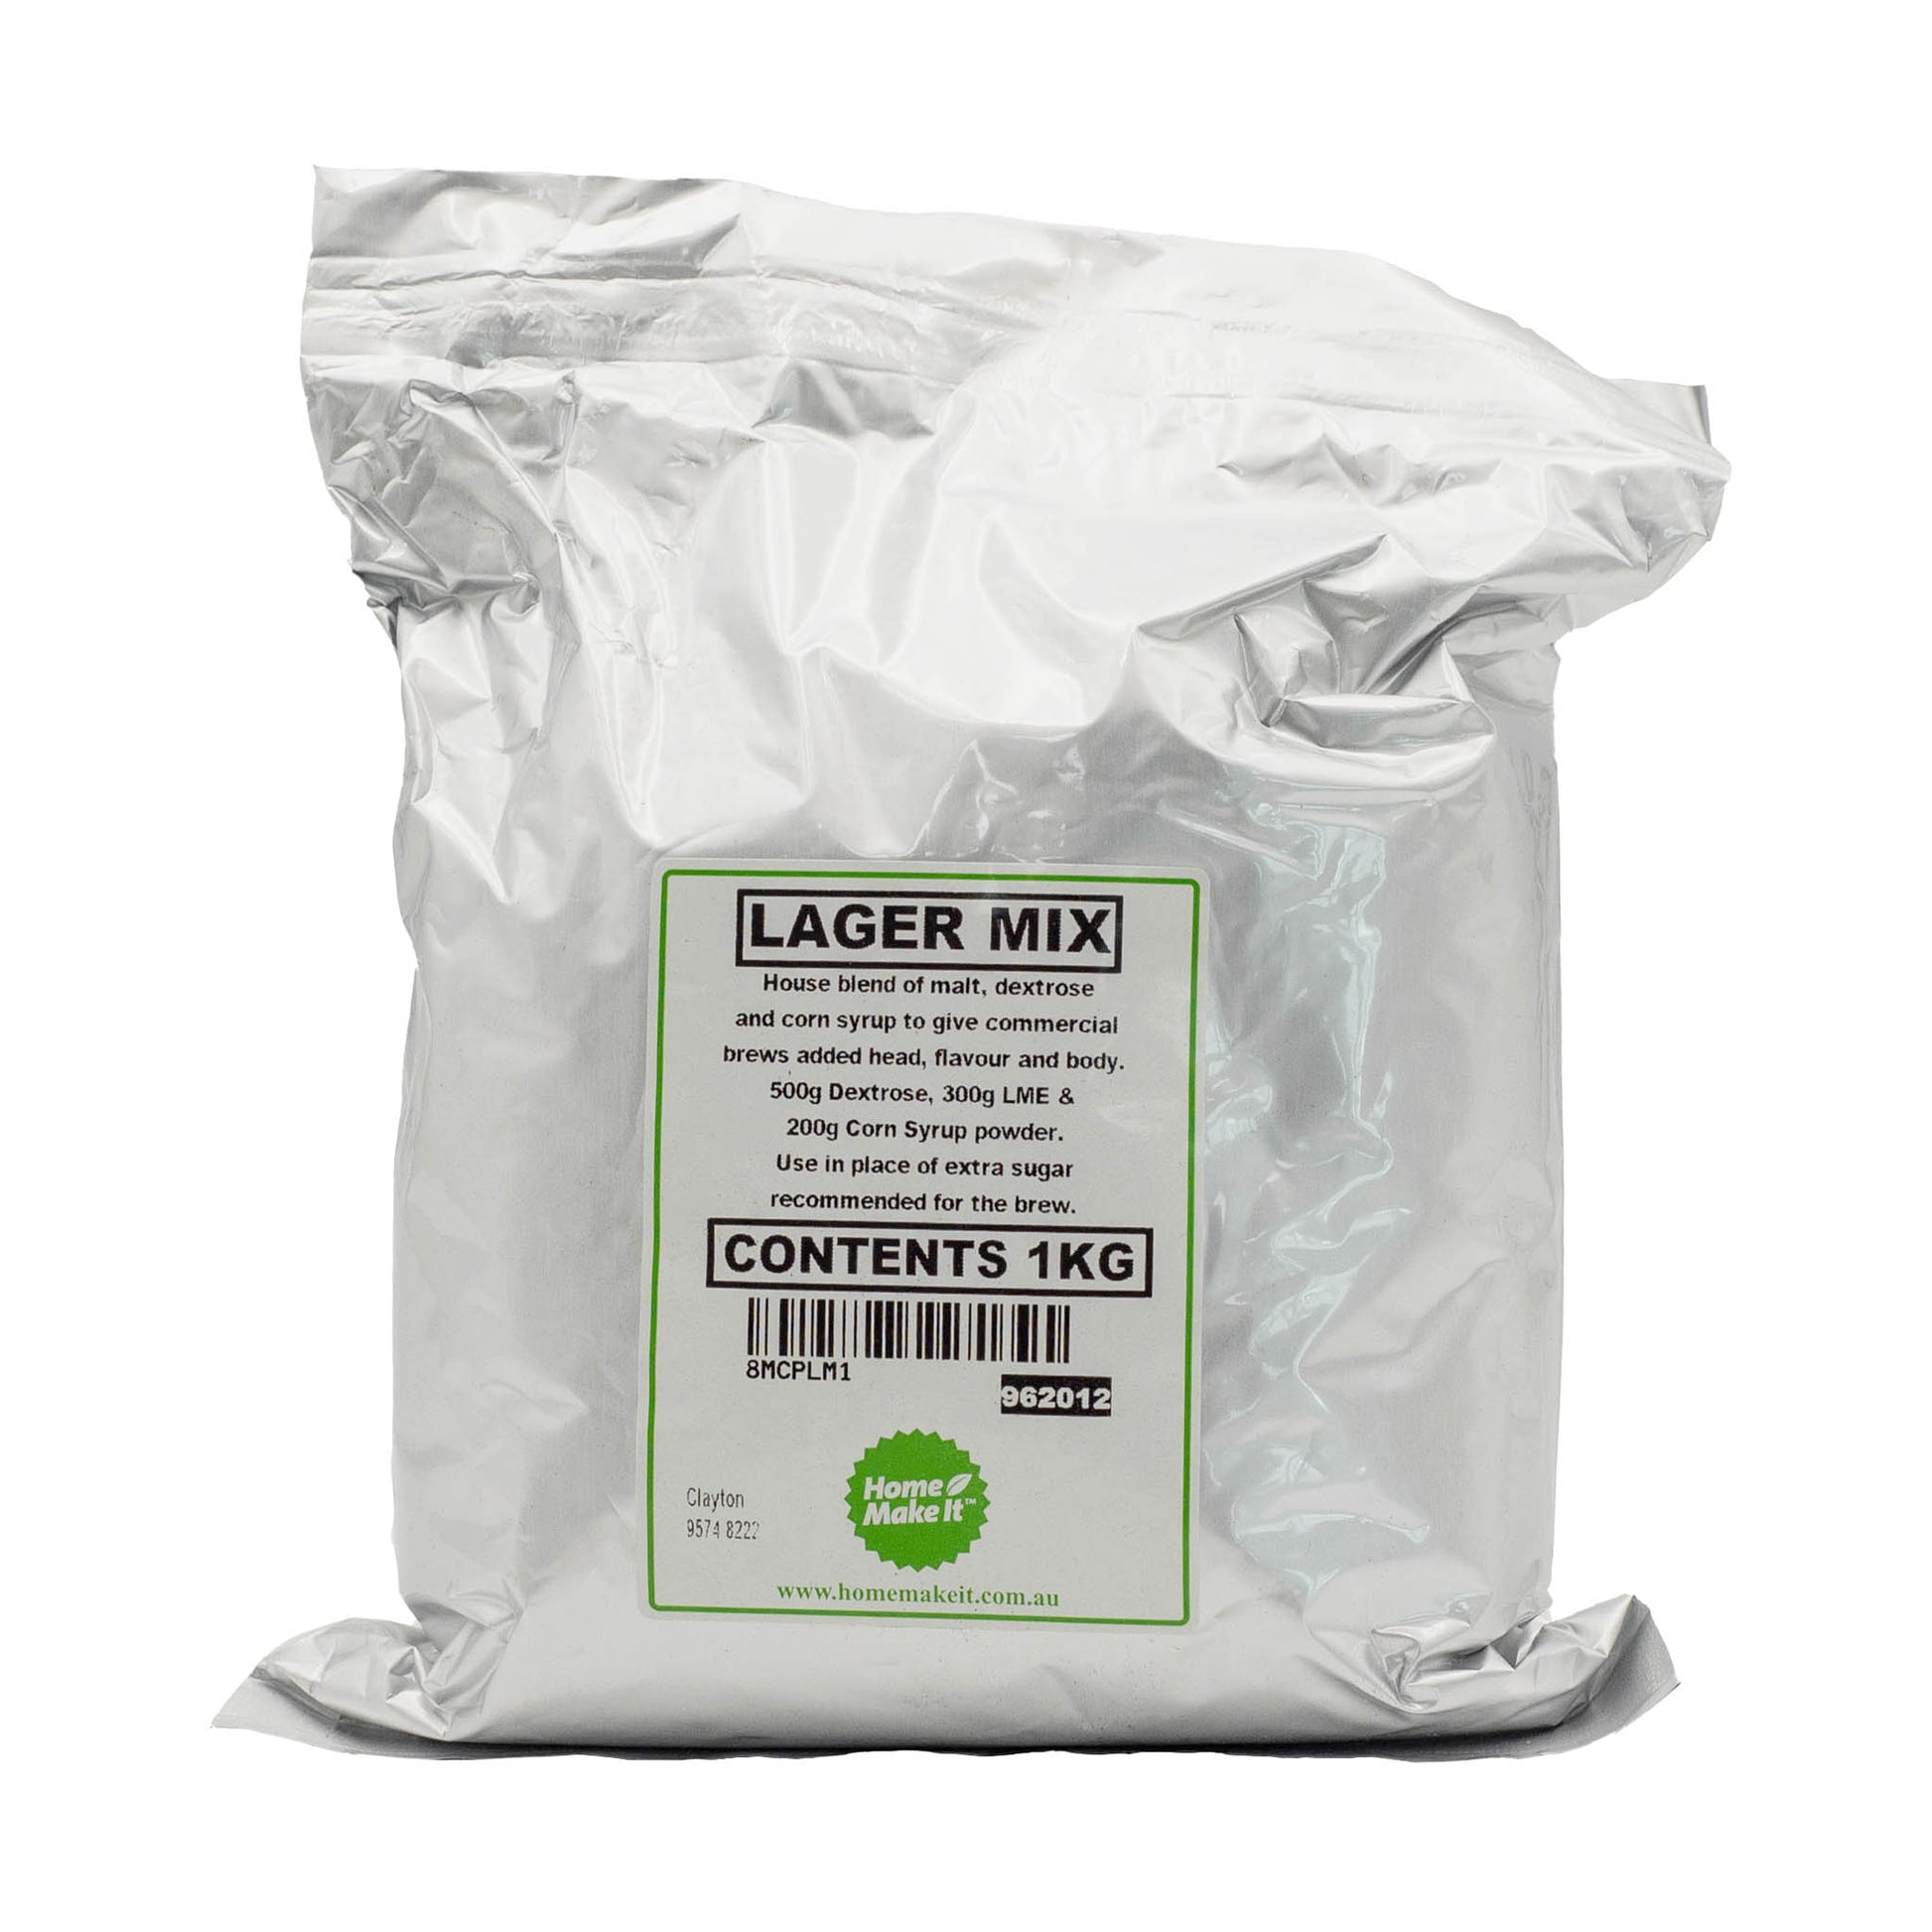 1kg. bag of dried lager malt mix. Specially formulated for lager style beers, head development and palate characteristics.